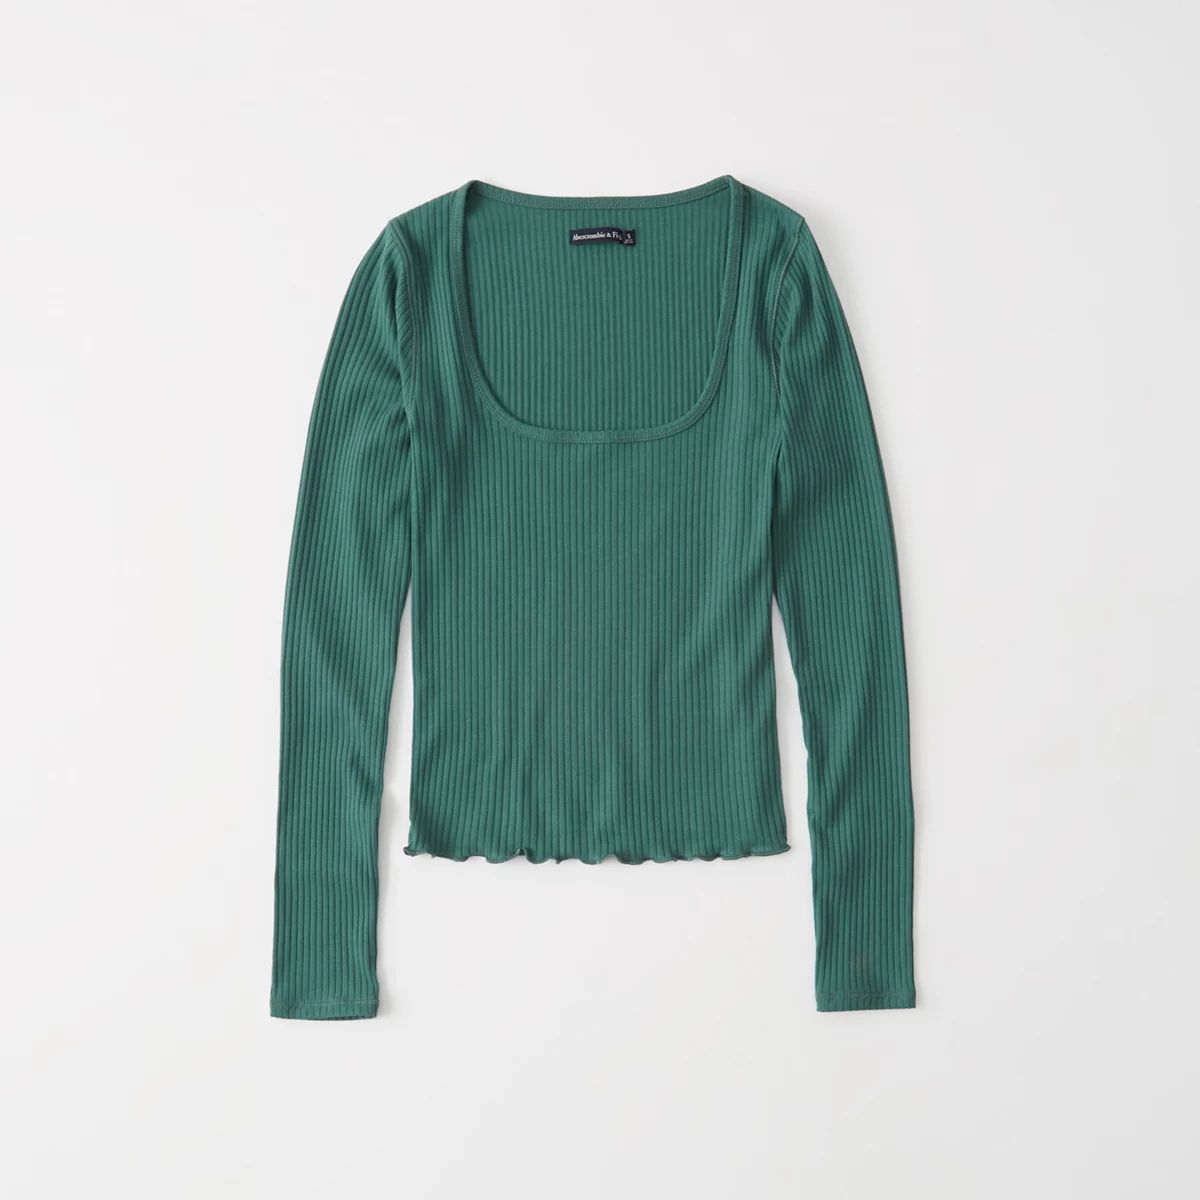 Long-Sleeve Square Neck Tee | Abercrombie & Fitch US & UK